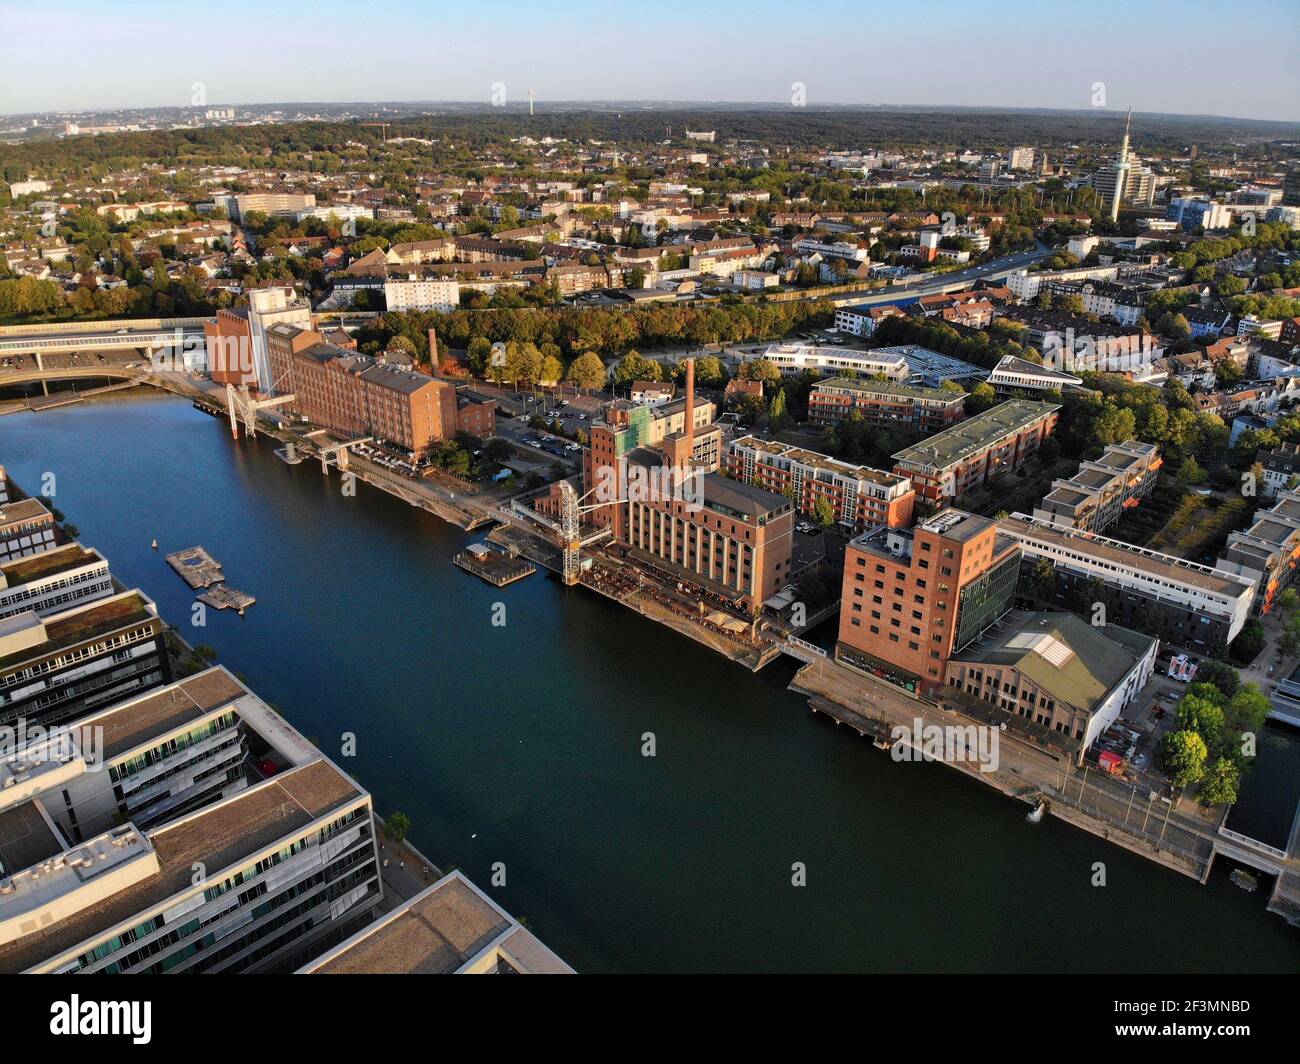 Duisburg city in Germany. Inner Harbor (Innenhafen). Former industrial architecture. Stock Photo